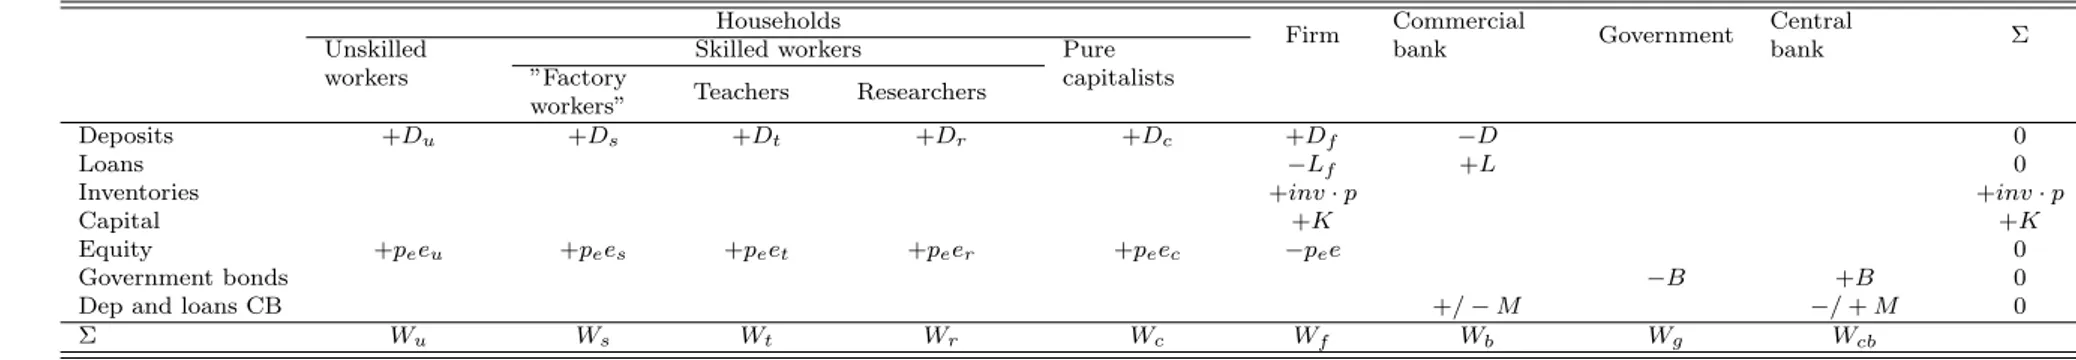 Table 7: Stock matrix Households Firm Commercial bank Government Centralbank ΣUnskilled workers